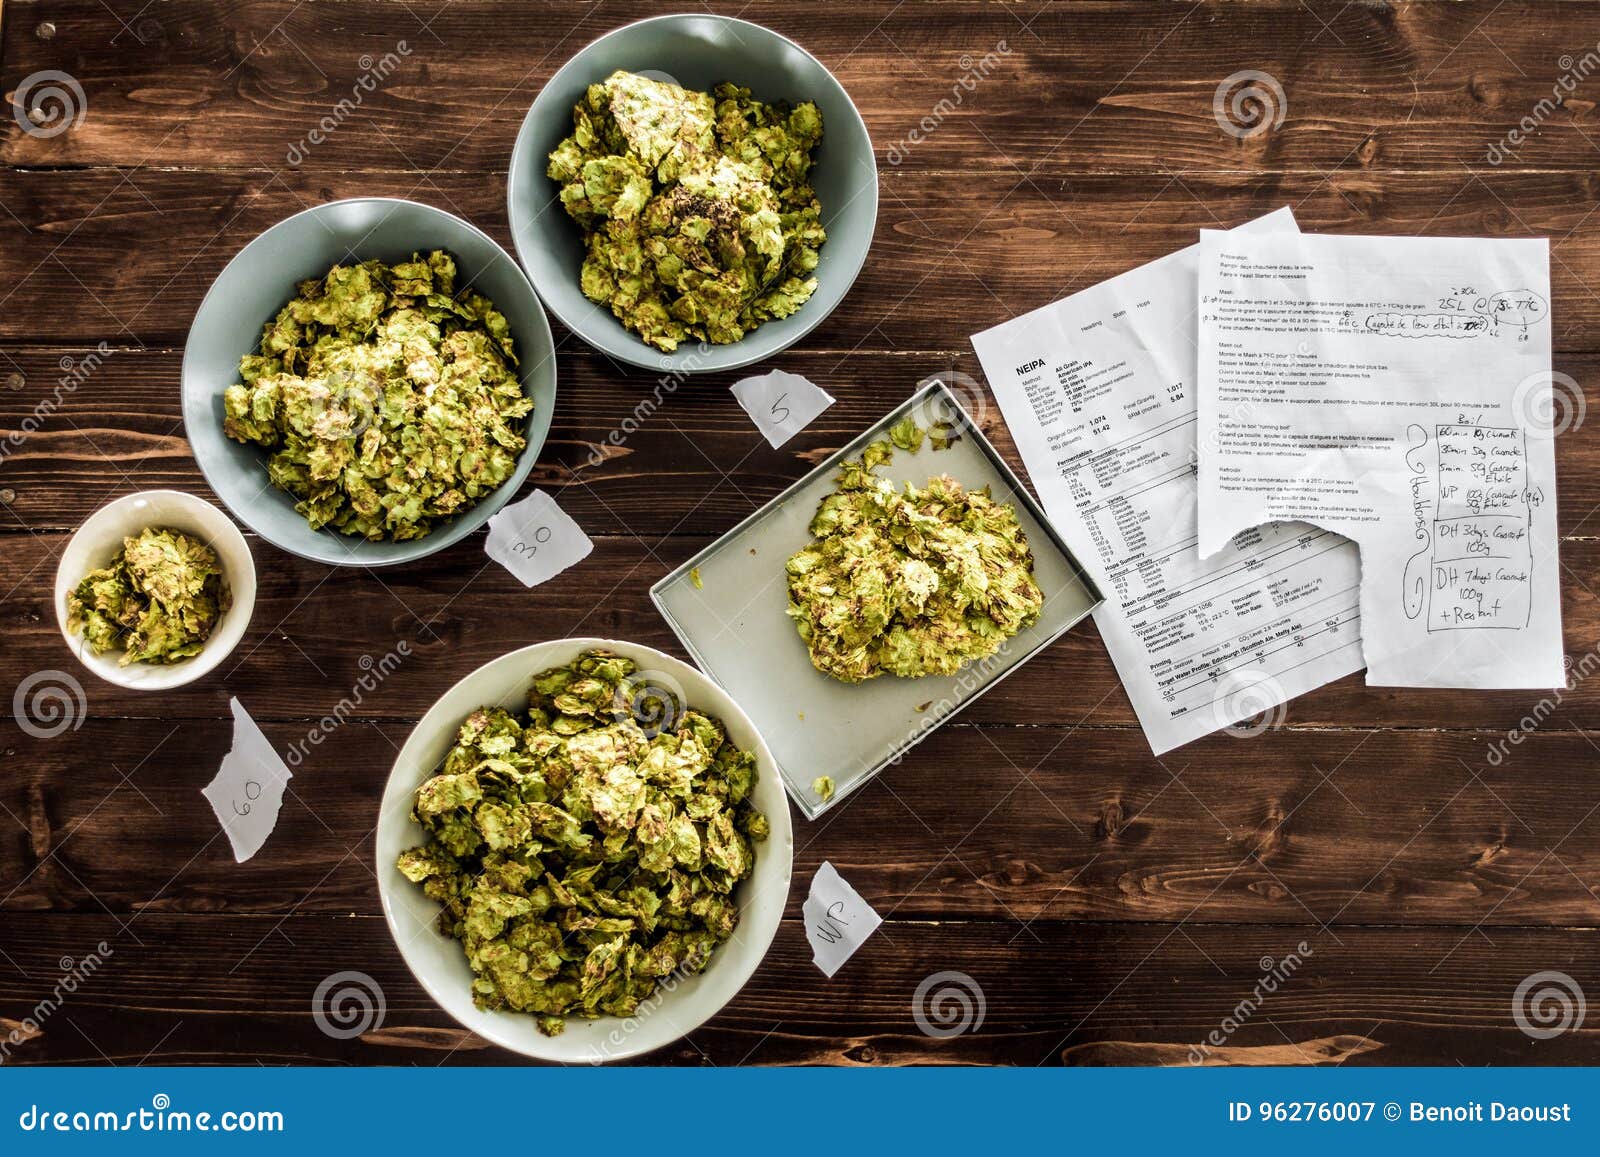 beer recipe and whole dried hops ready to be pitched in the kettle of a homebrewer.